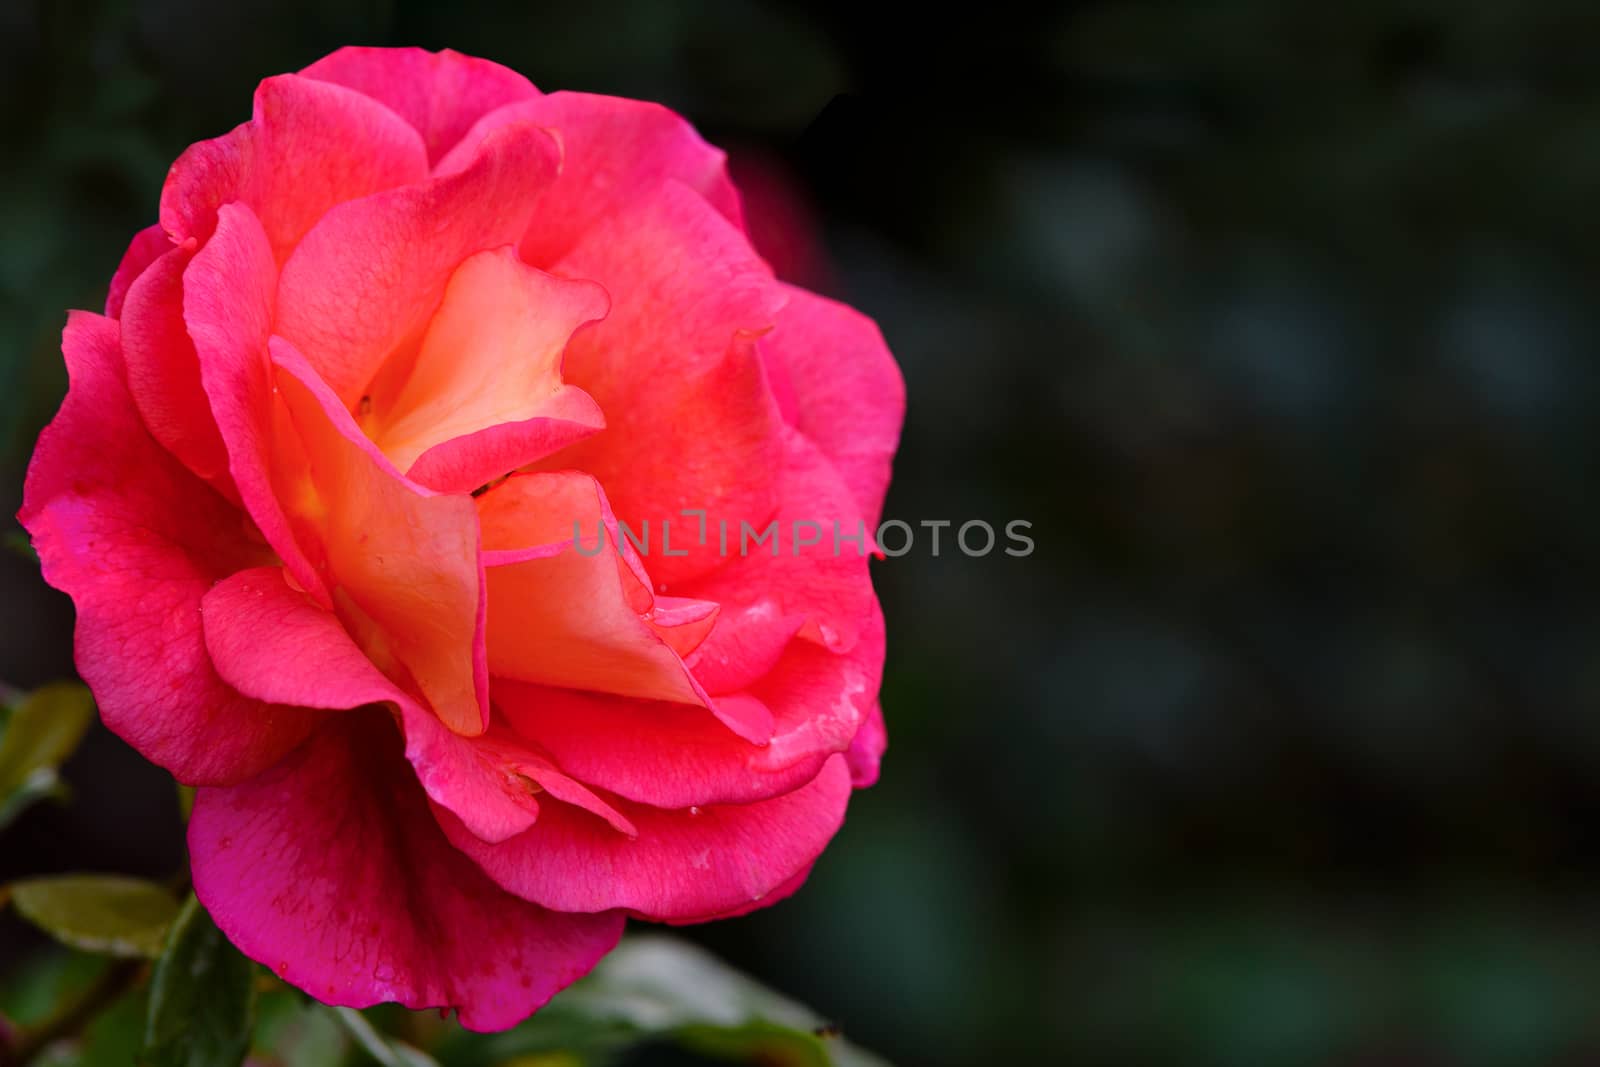 Beautifully blooming pink rose against a blurred background of the garden in close-up (with copy space)